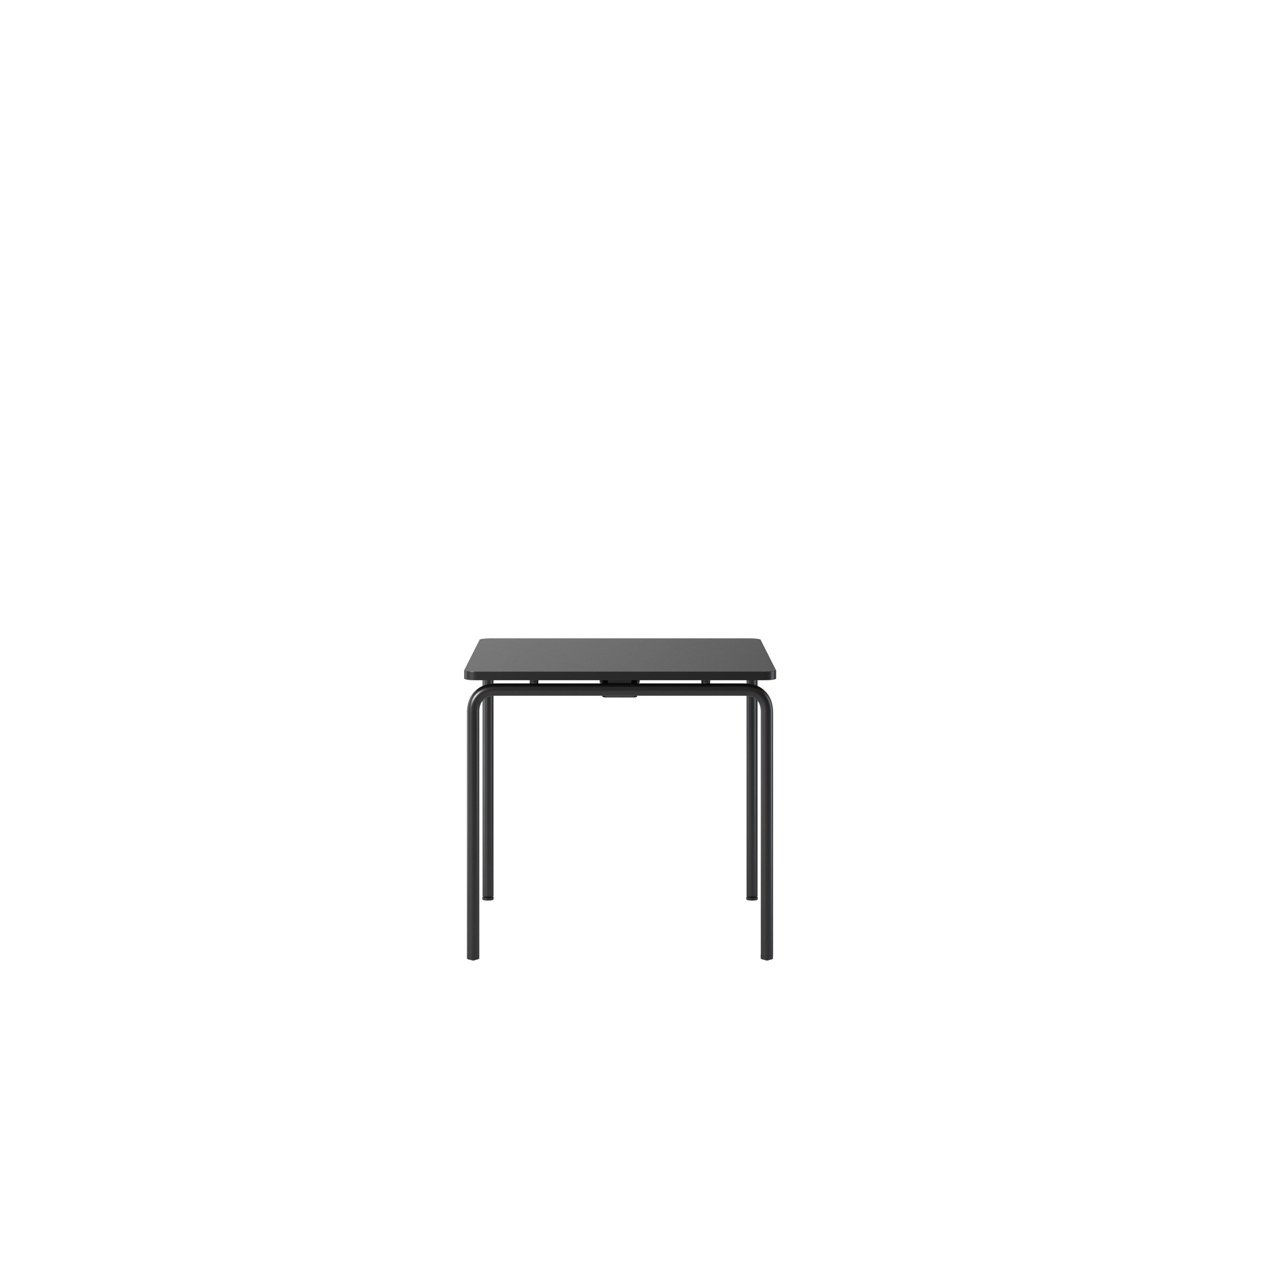 OCEE&FOUR - Tables - FourReal 74 - 80 x 80 - Straight - Packshot Image 2 Large